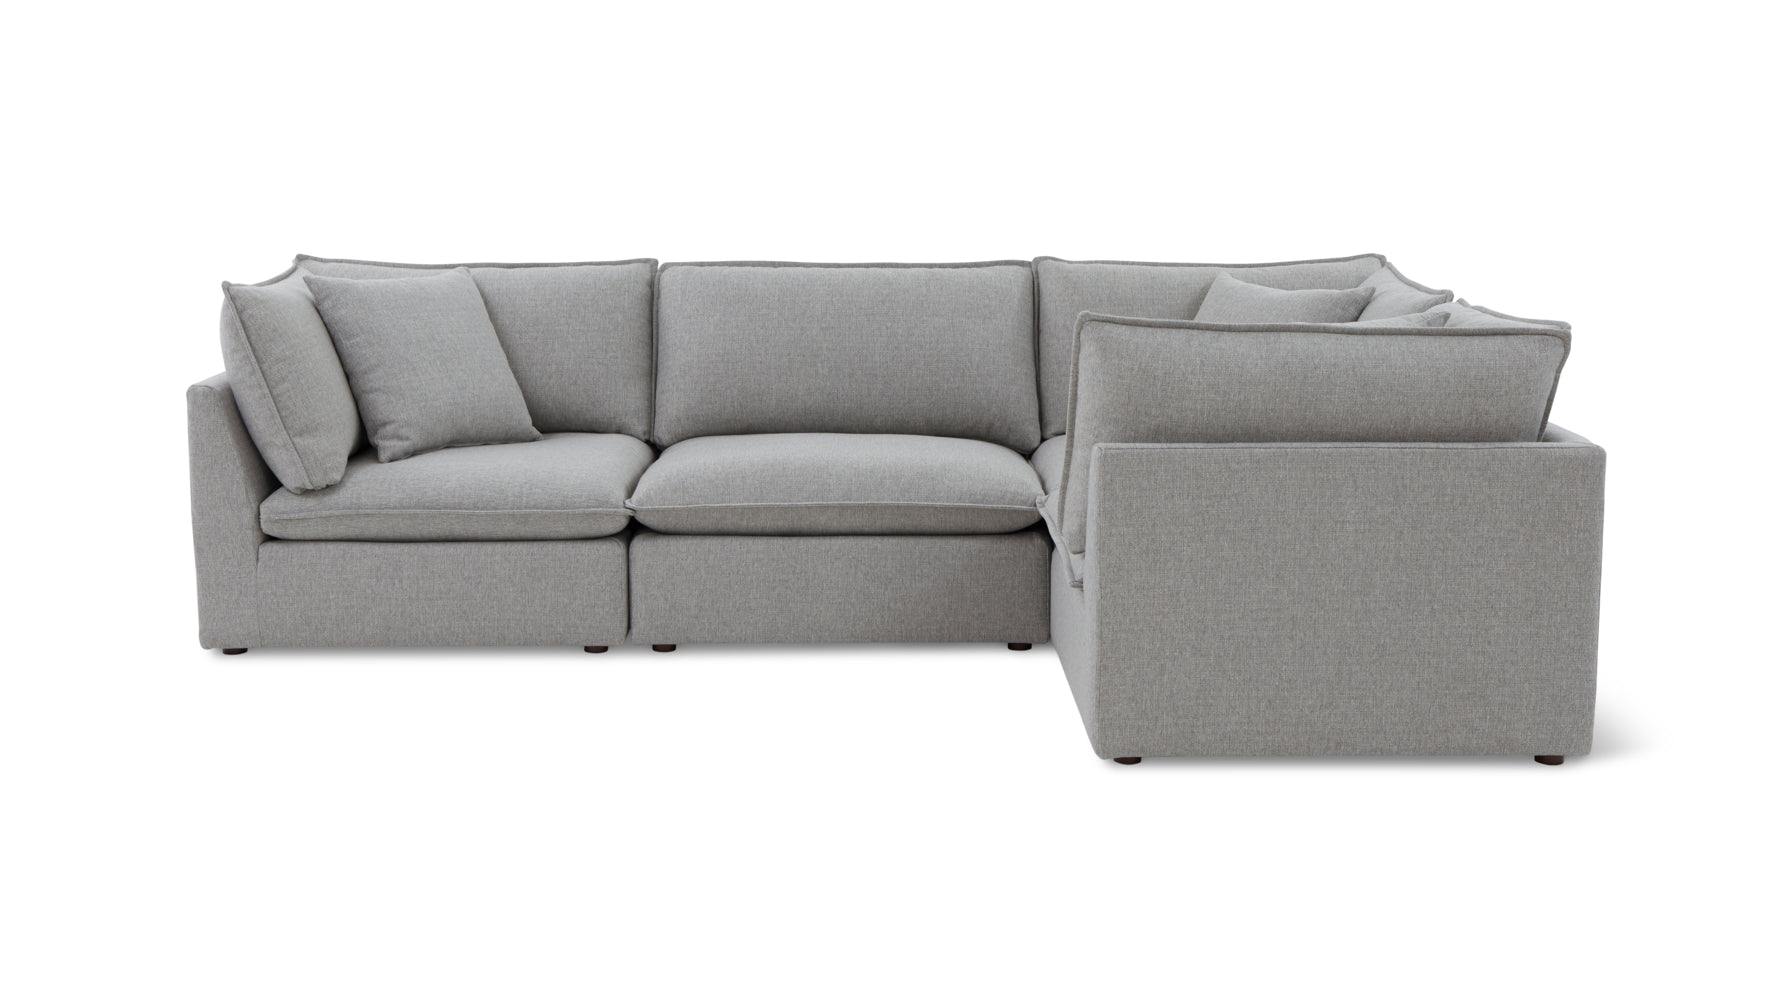 Chill Time 4-Piece Modular Sectional Closed, Heather - Image 1